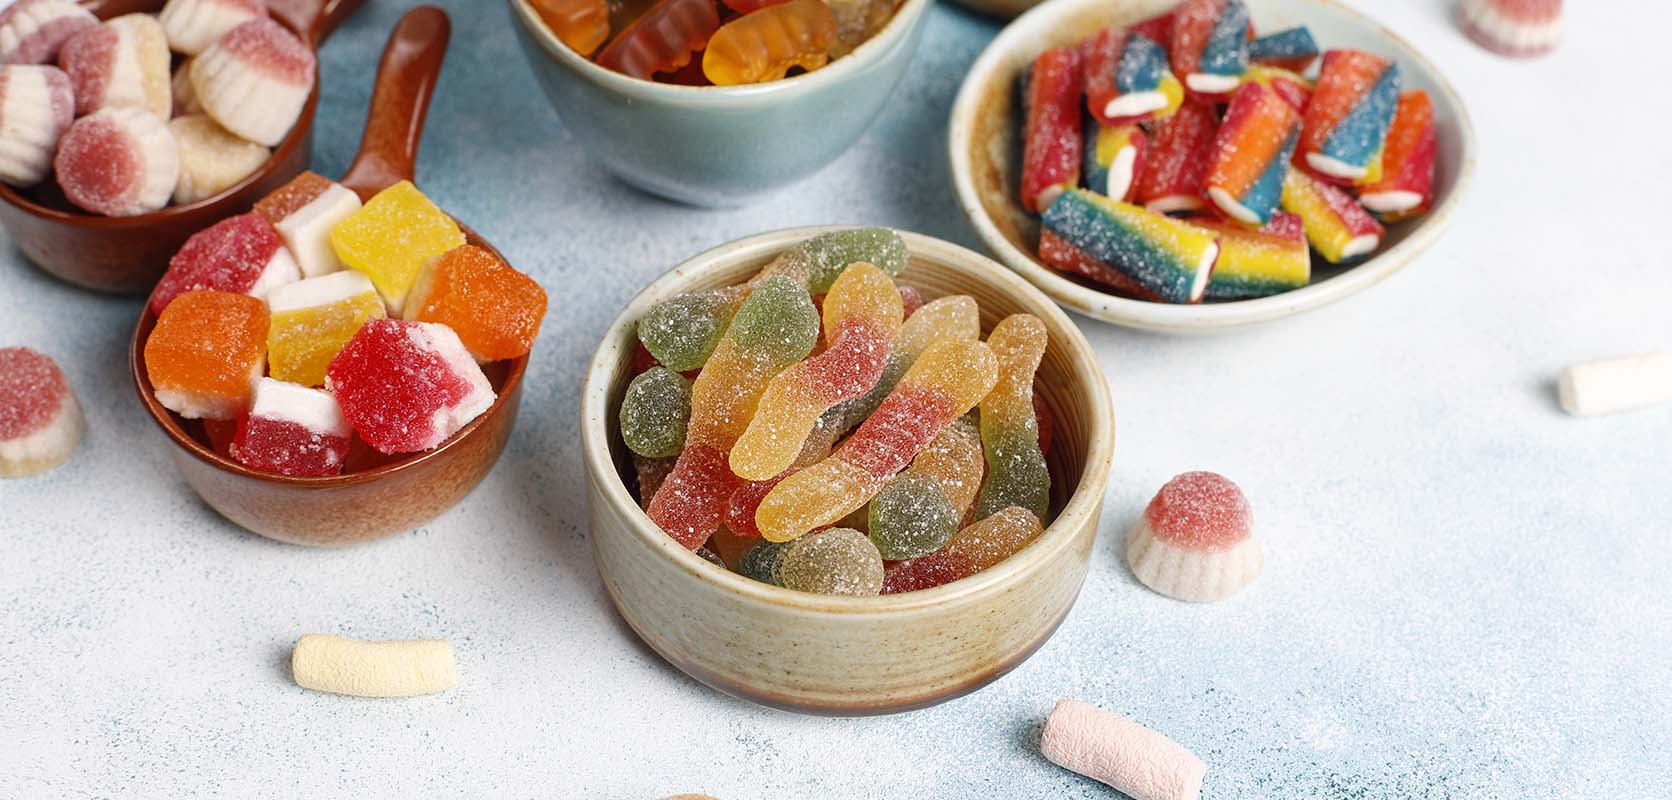 weed gummies and THC gummy bears and gummy worms from weed dispensary Low Price Bud. 